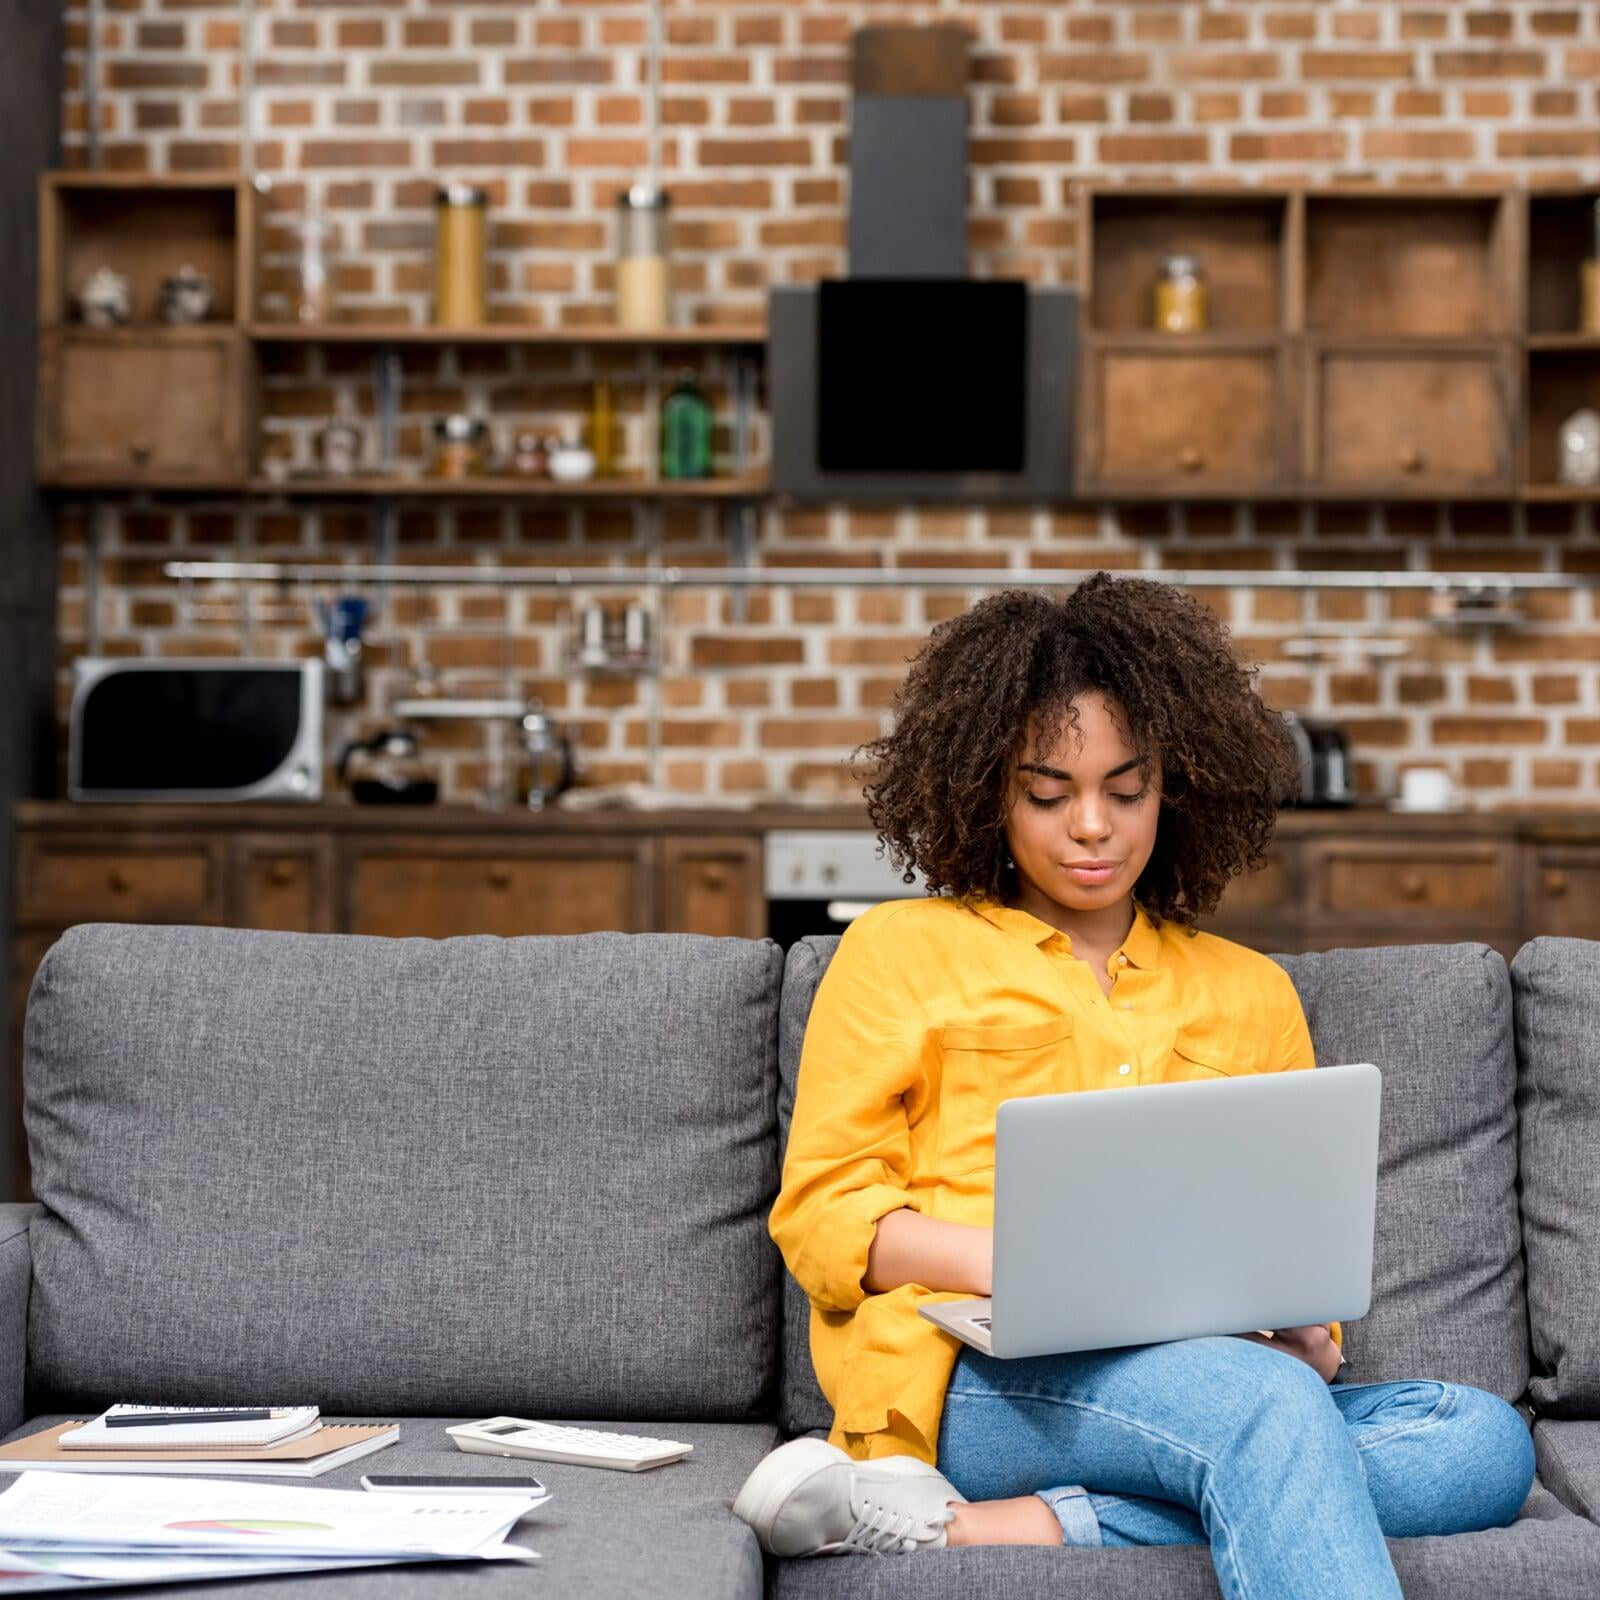 Image of a woman sitting on a couch working on a laptop.